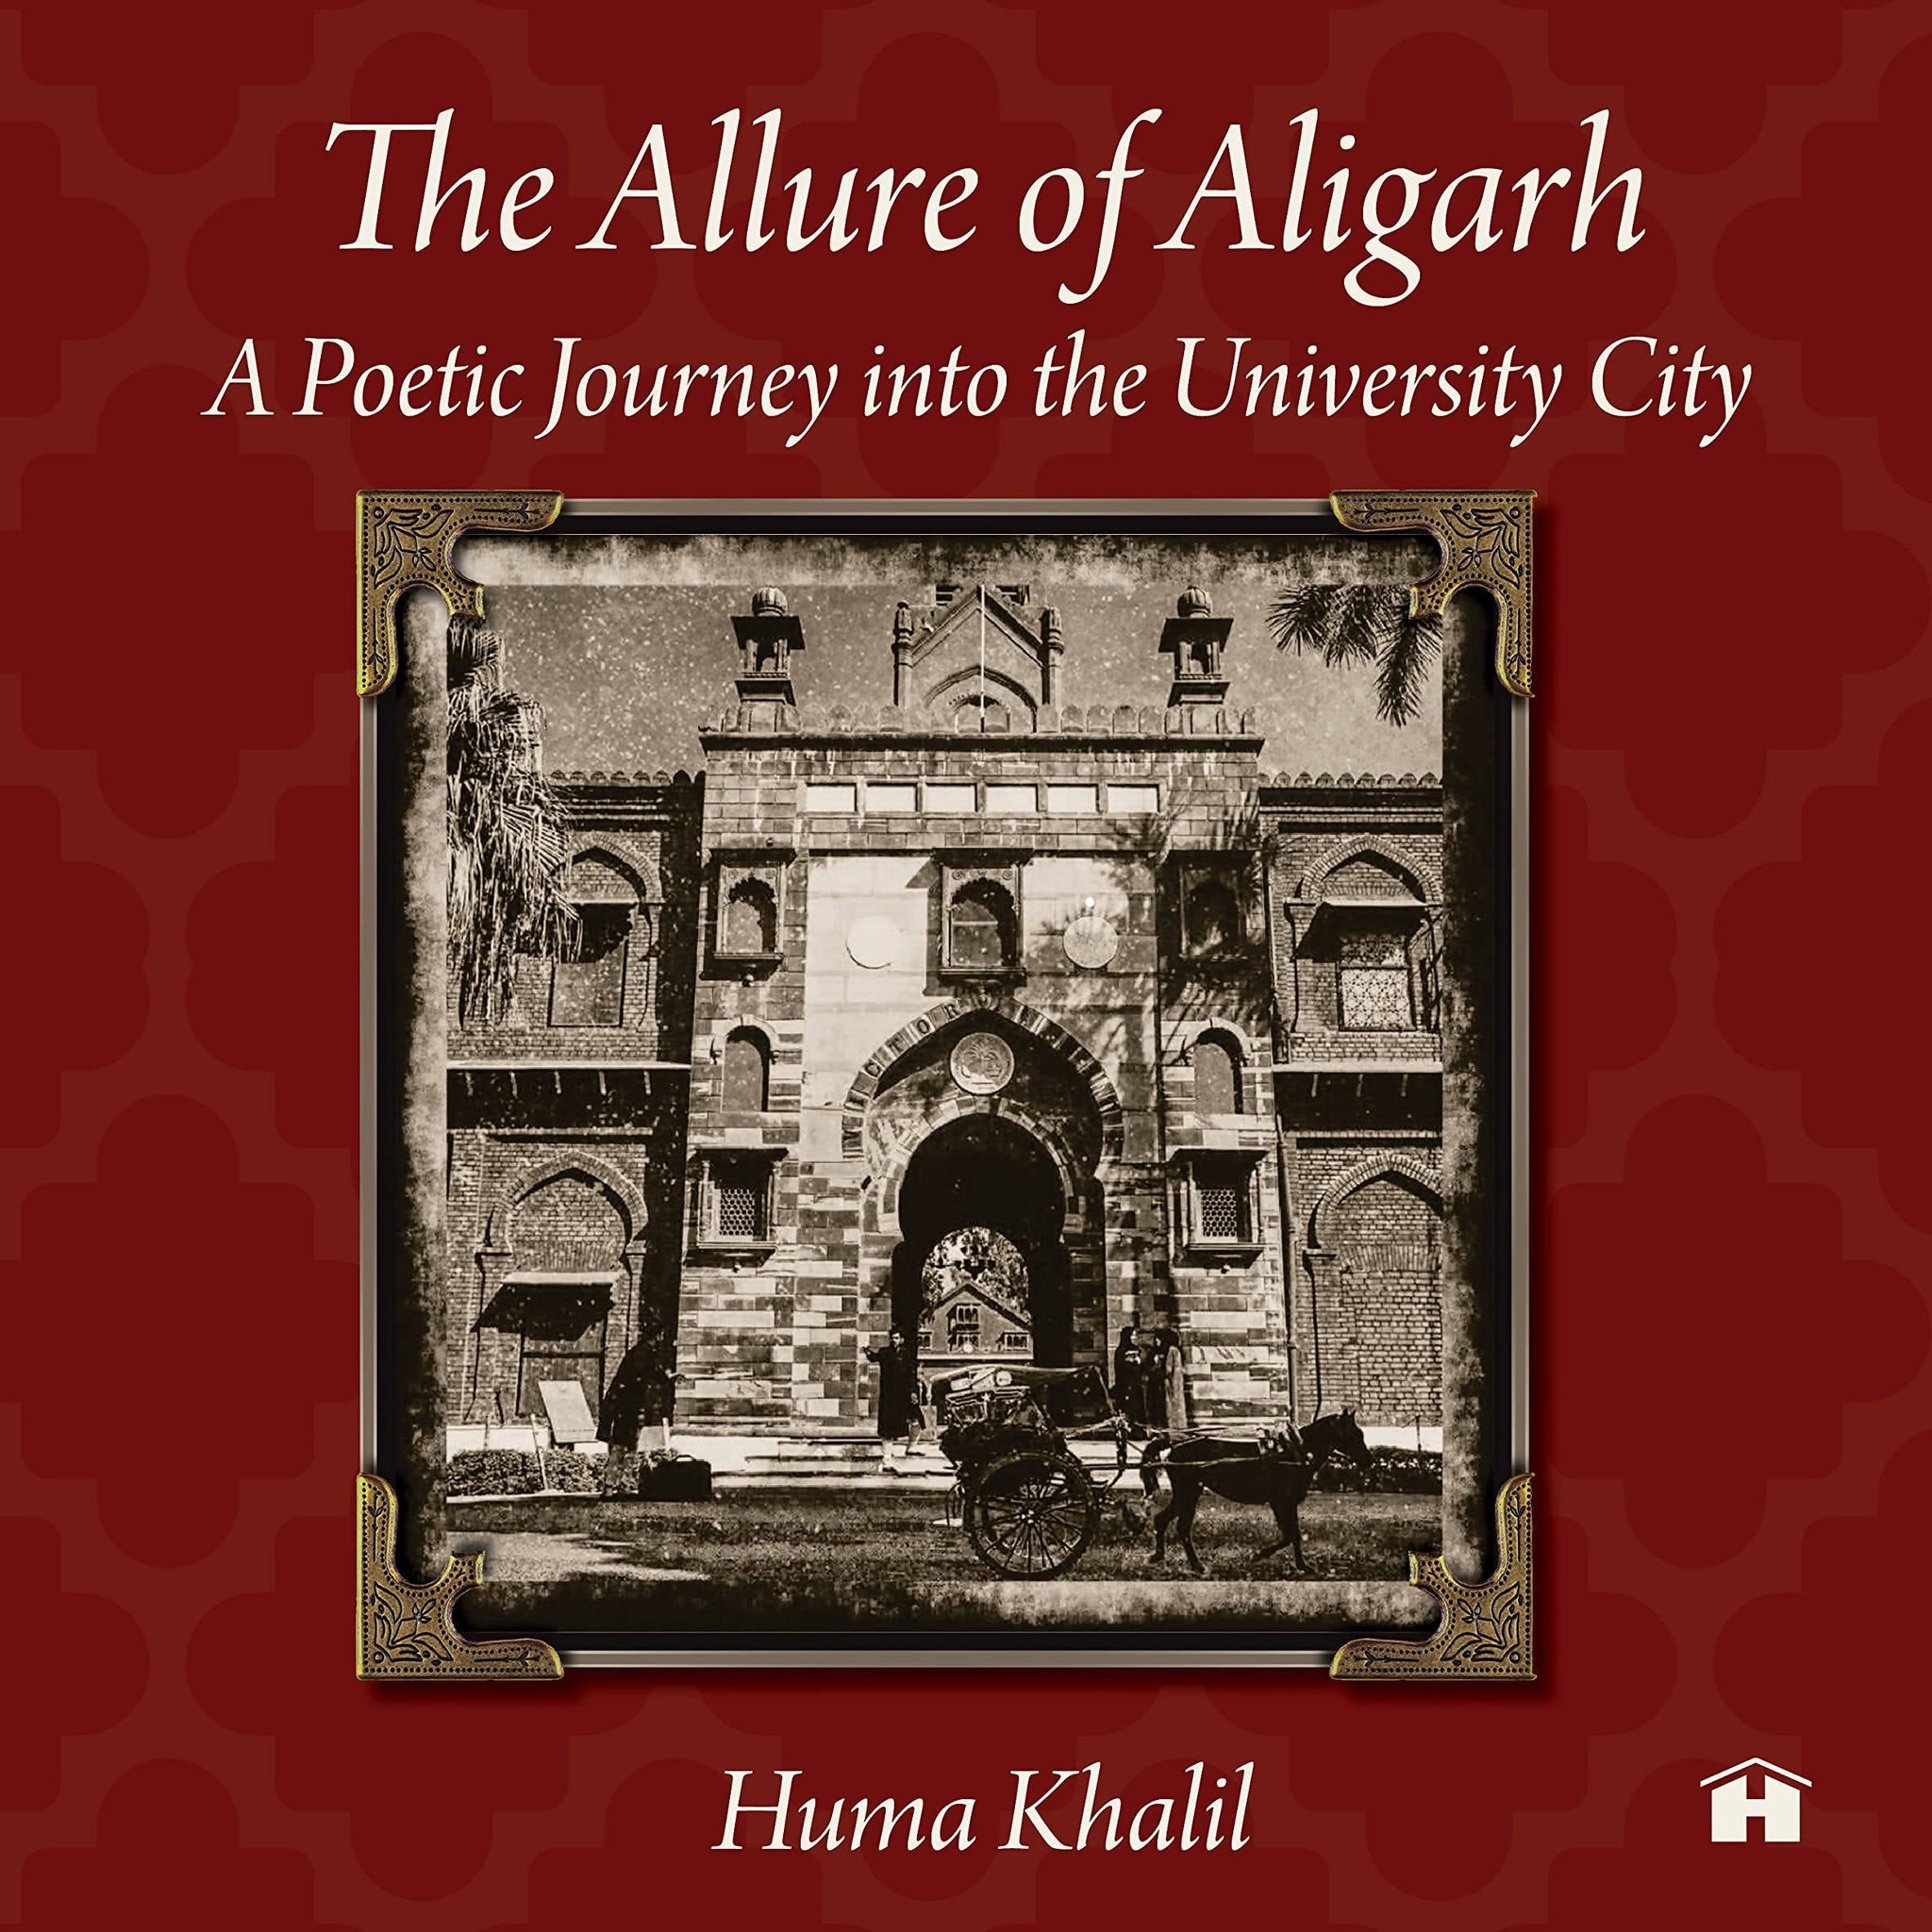 The Allure of Aligarh: A Poetic Journey into the University City